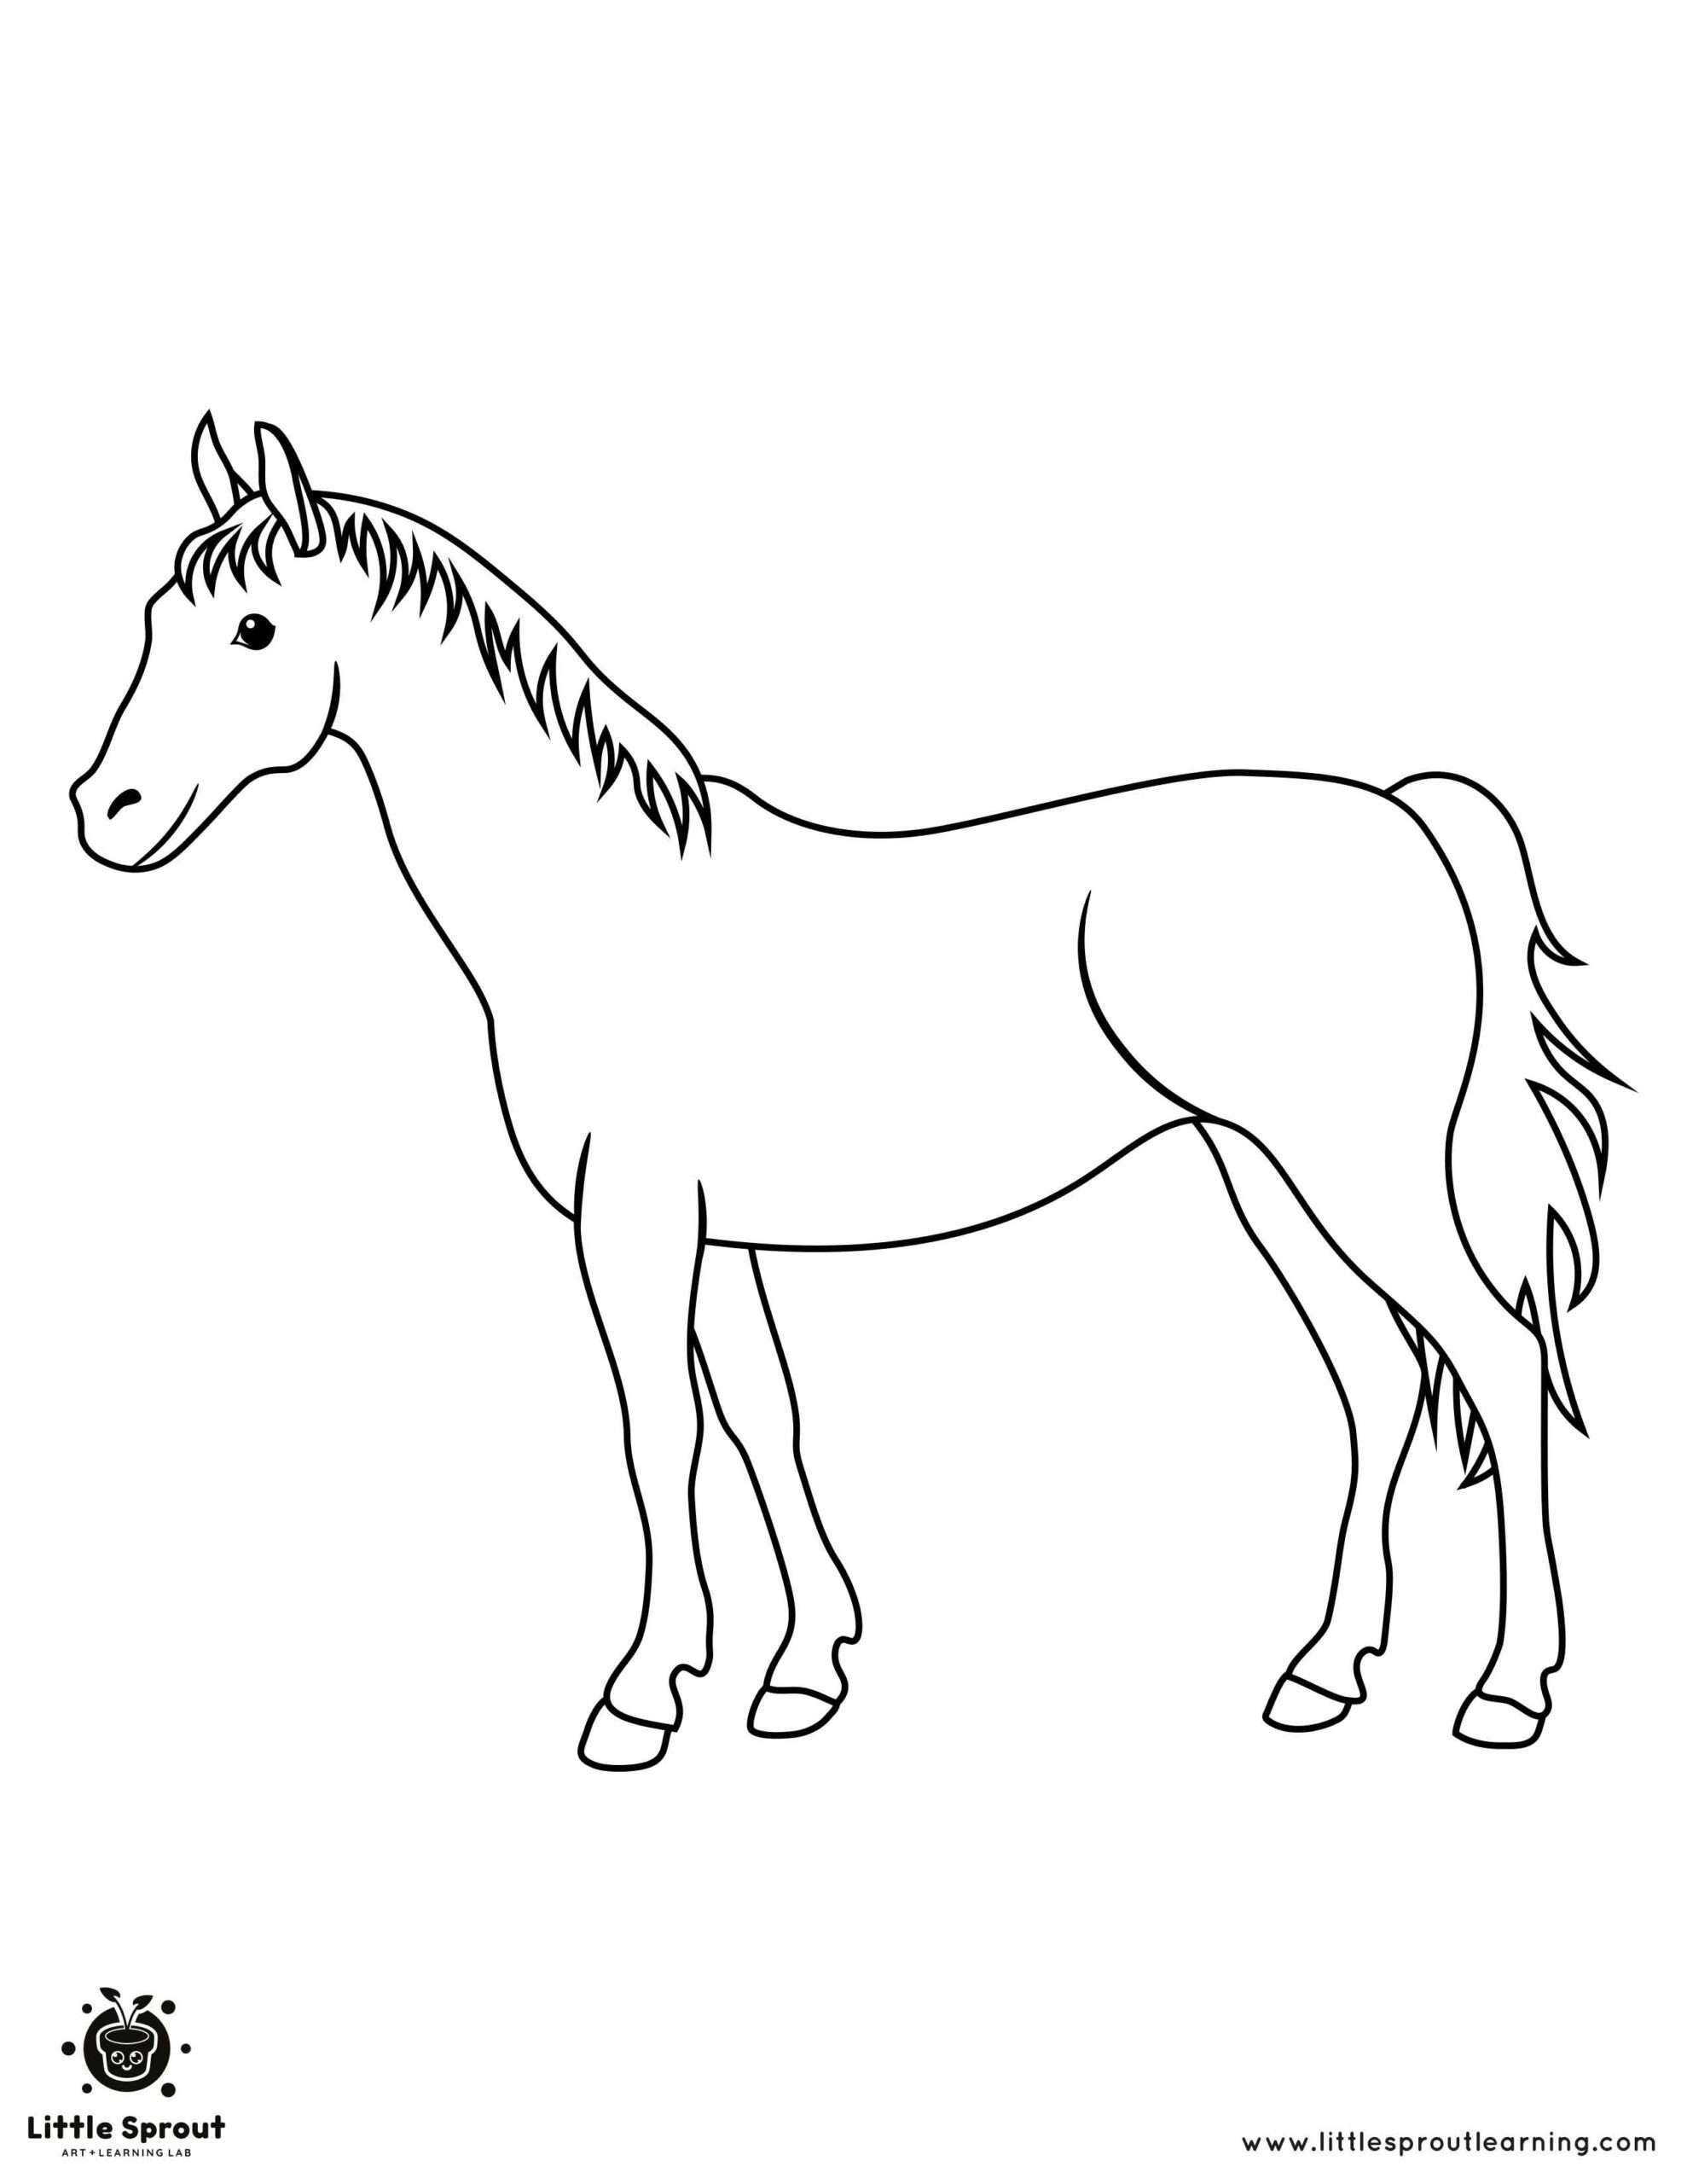 Coloring Page Horses 1 Little Sprout Learning scaled